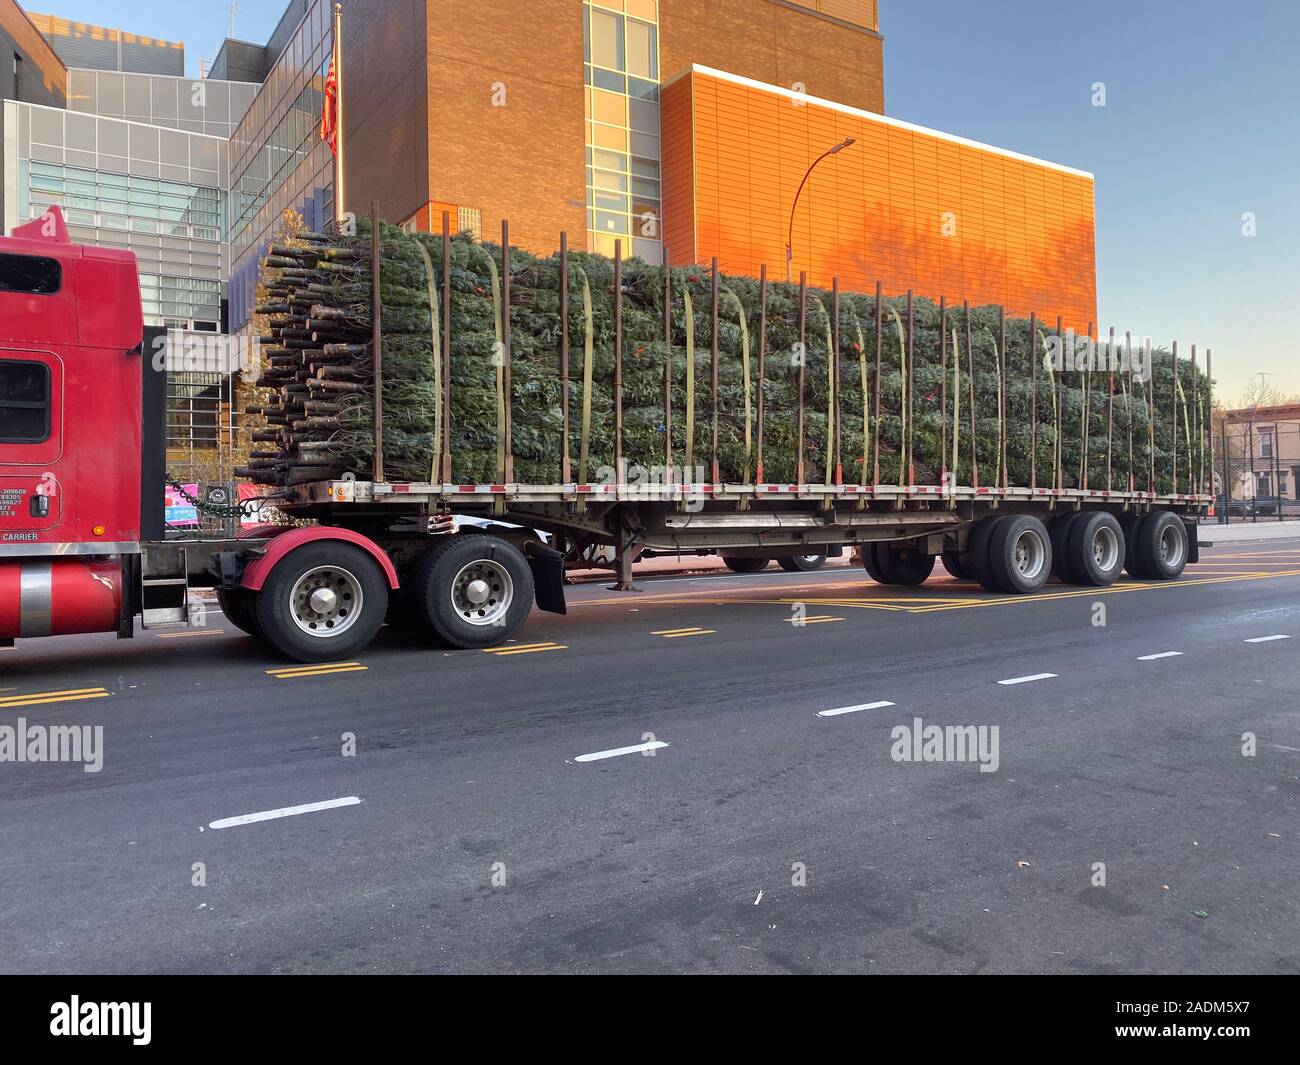 Truck Delivers Christmas Trees Brought From Quebec Canada To Be